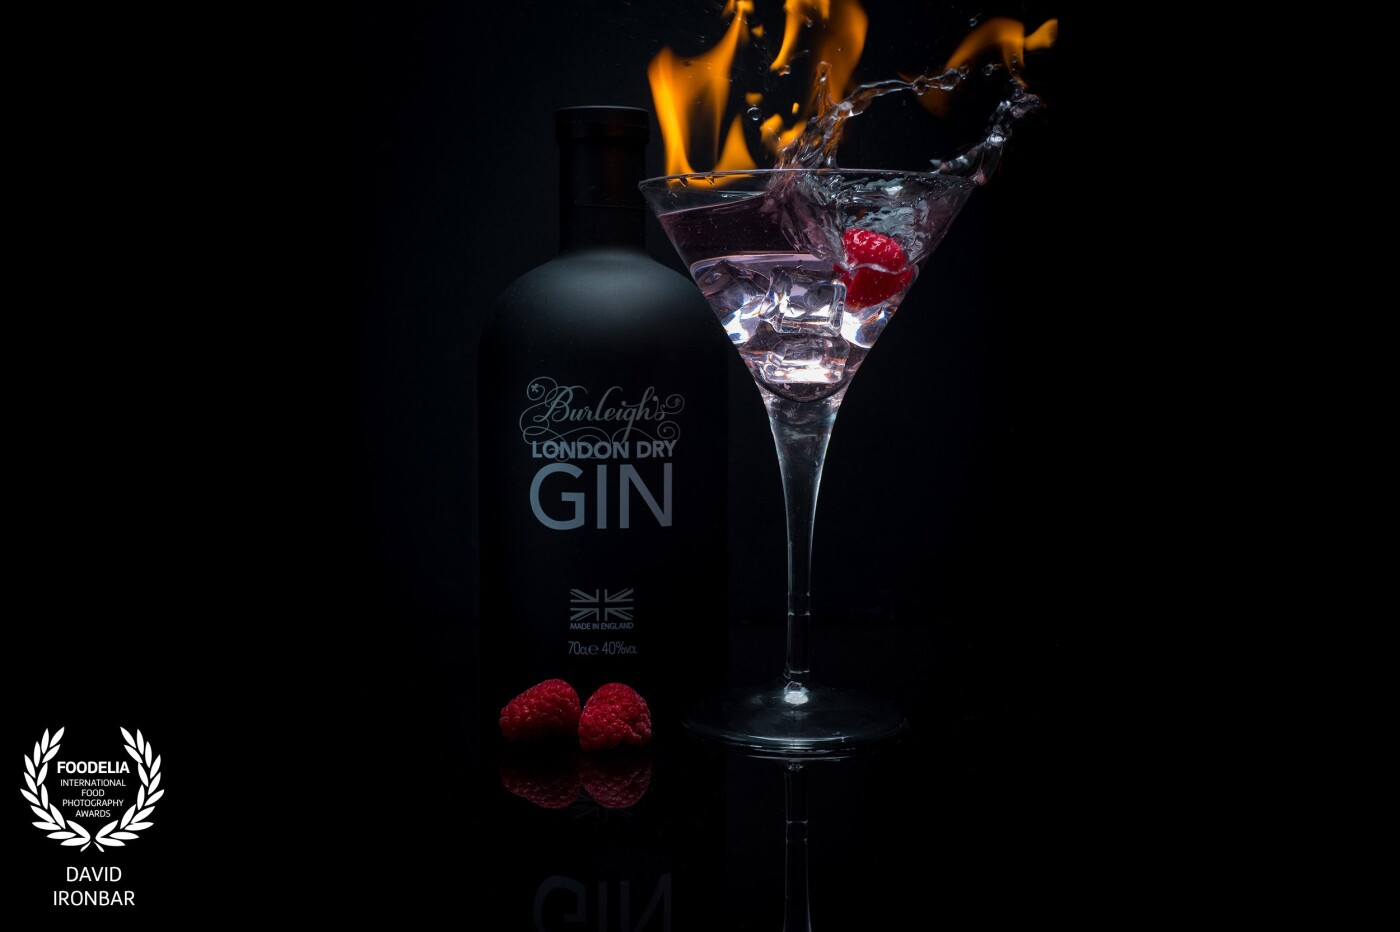 Raspberry Gin Fizz consisting of Burleigh’s London Dry Gin, topped with Prosecco and a fresh raspberry to garnish. <br />
Fresh raspberry to garnish.